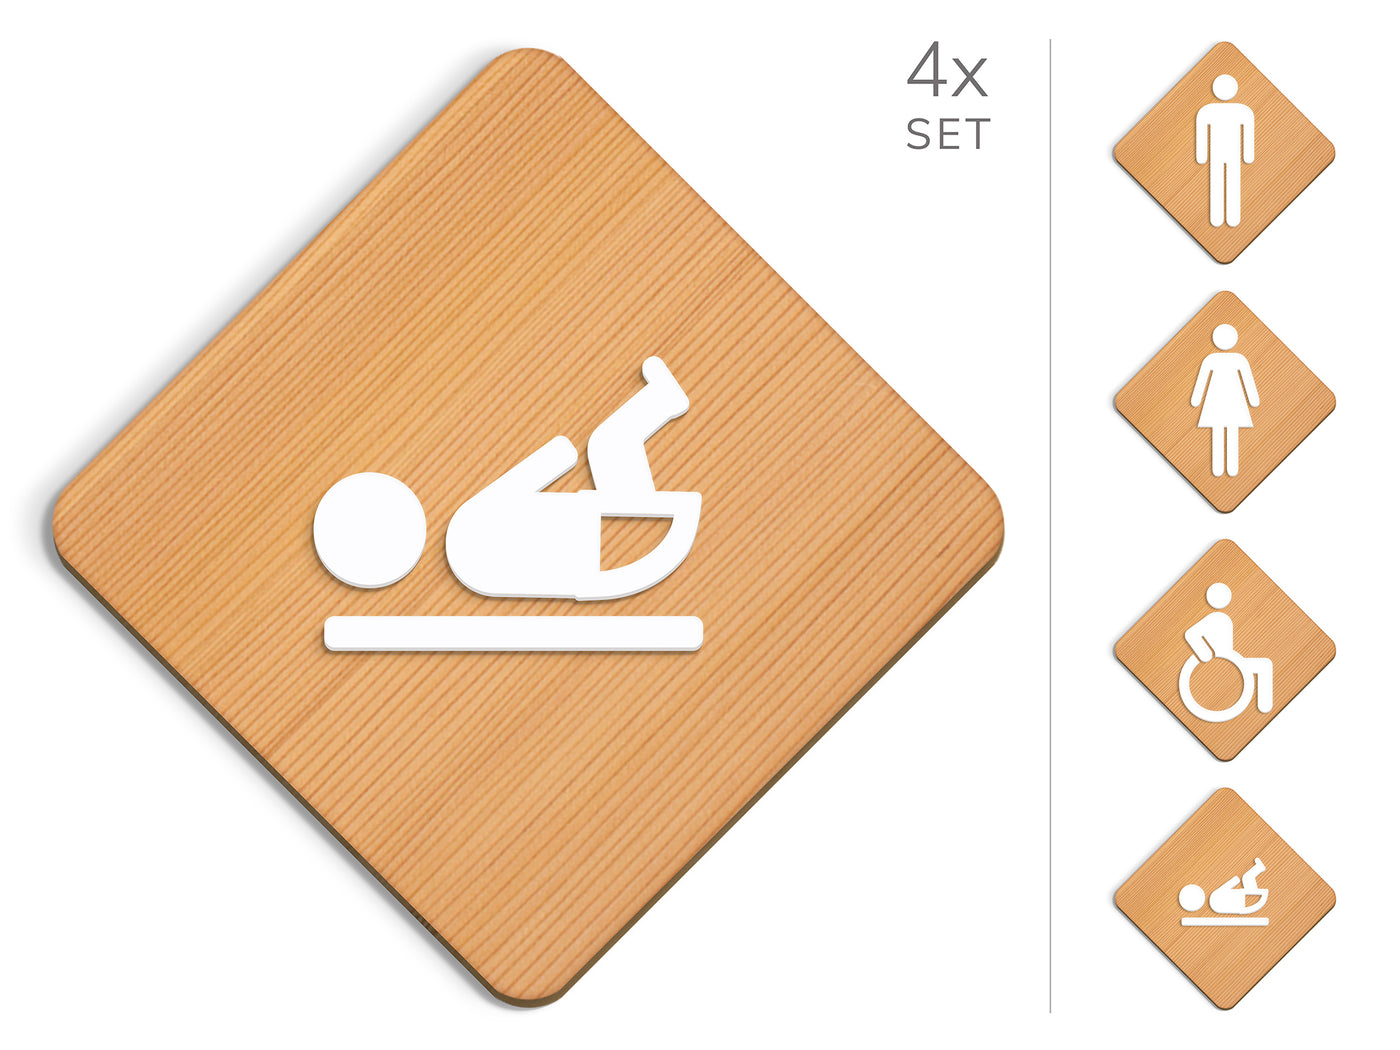 Classic, 4x Rhombus Base - Restroom Signs Set - Man, Woman, Disabled, Changing table